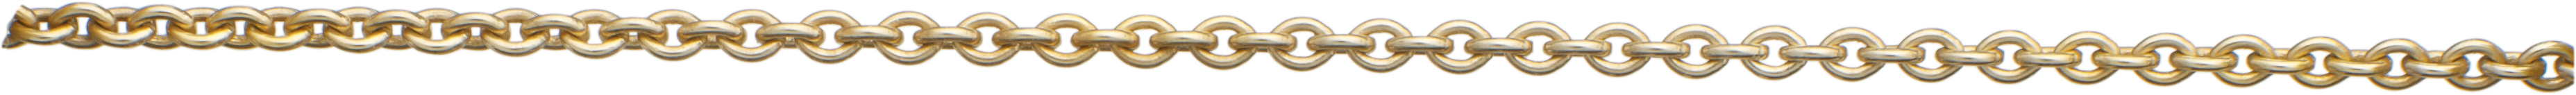 Anchor chain round gold 585/- 1.50mm, wire thickness 0.40mm